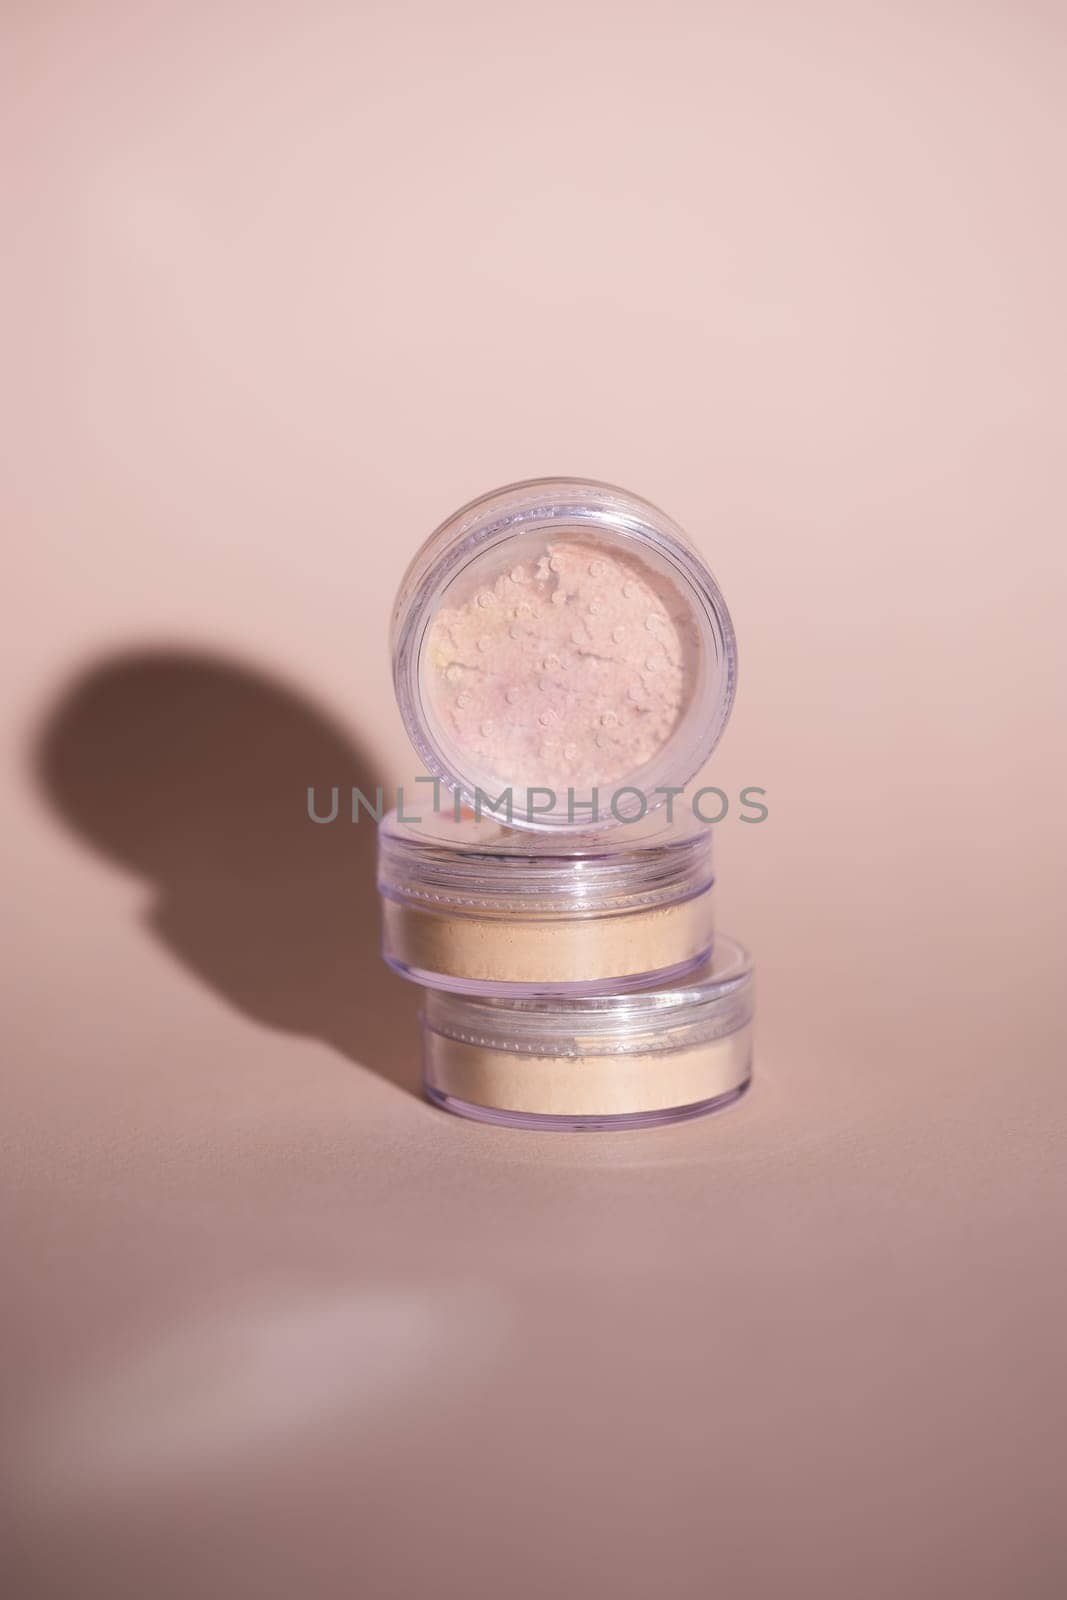 Mineral powder for skin tone color in small containers on pale rose colour background with shadows - beauty product and make up concept by Satura86